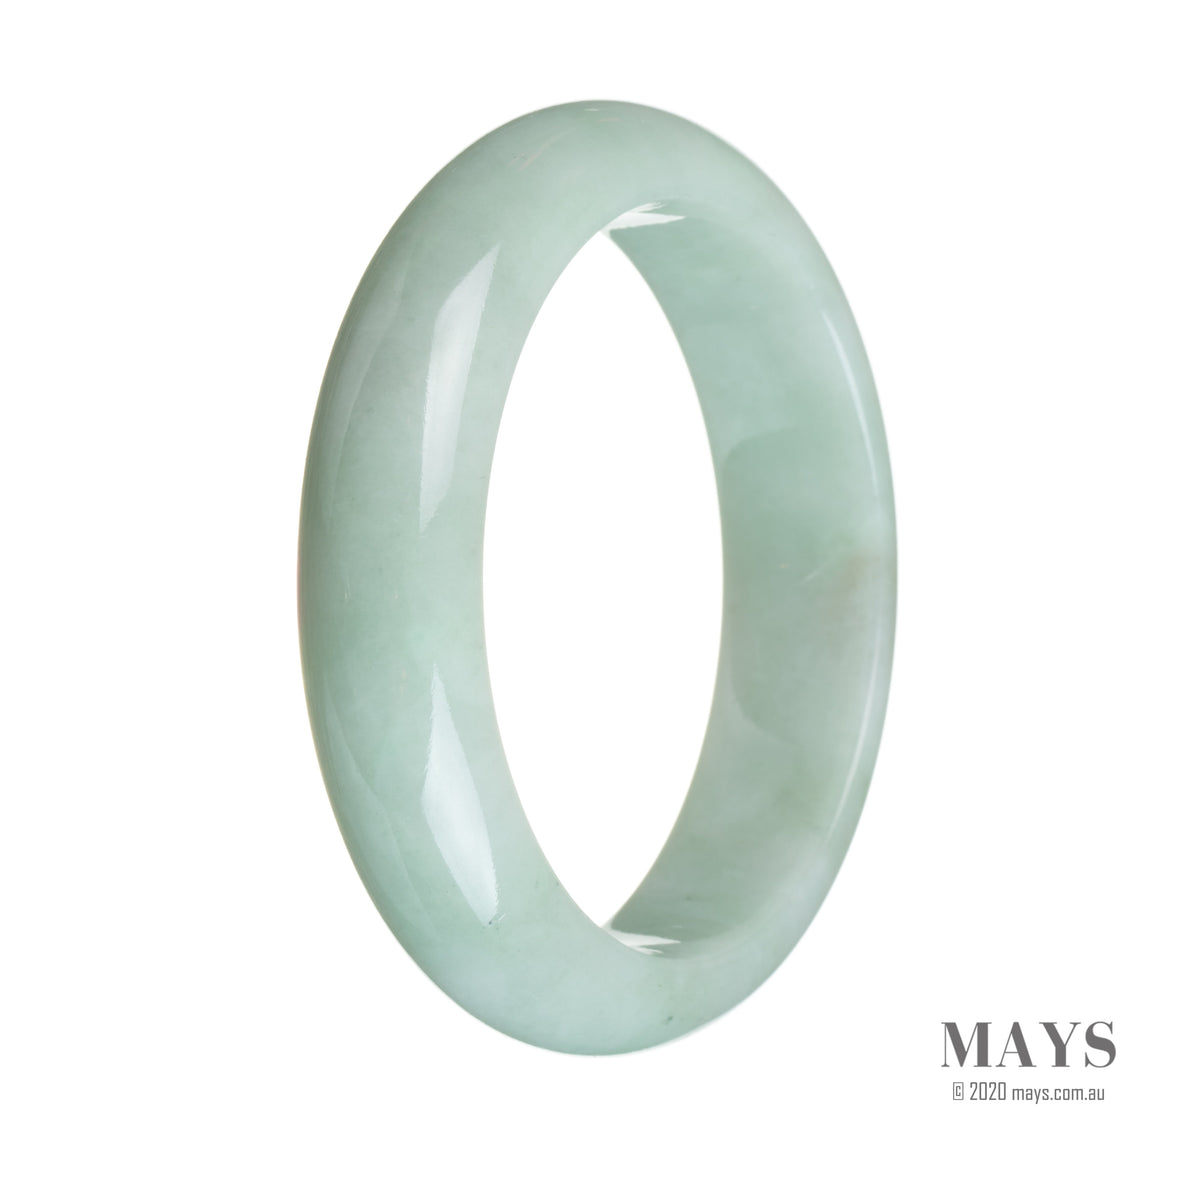 A light green jade bangle with a semi-round shape, measuring 62mm in size. A genuine grade A piece, perfect for jewelry enthusiasts from MAYS GEMS.